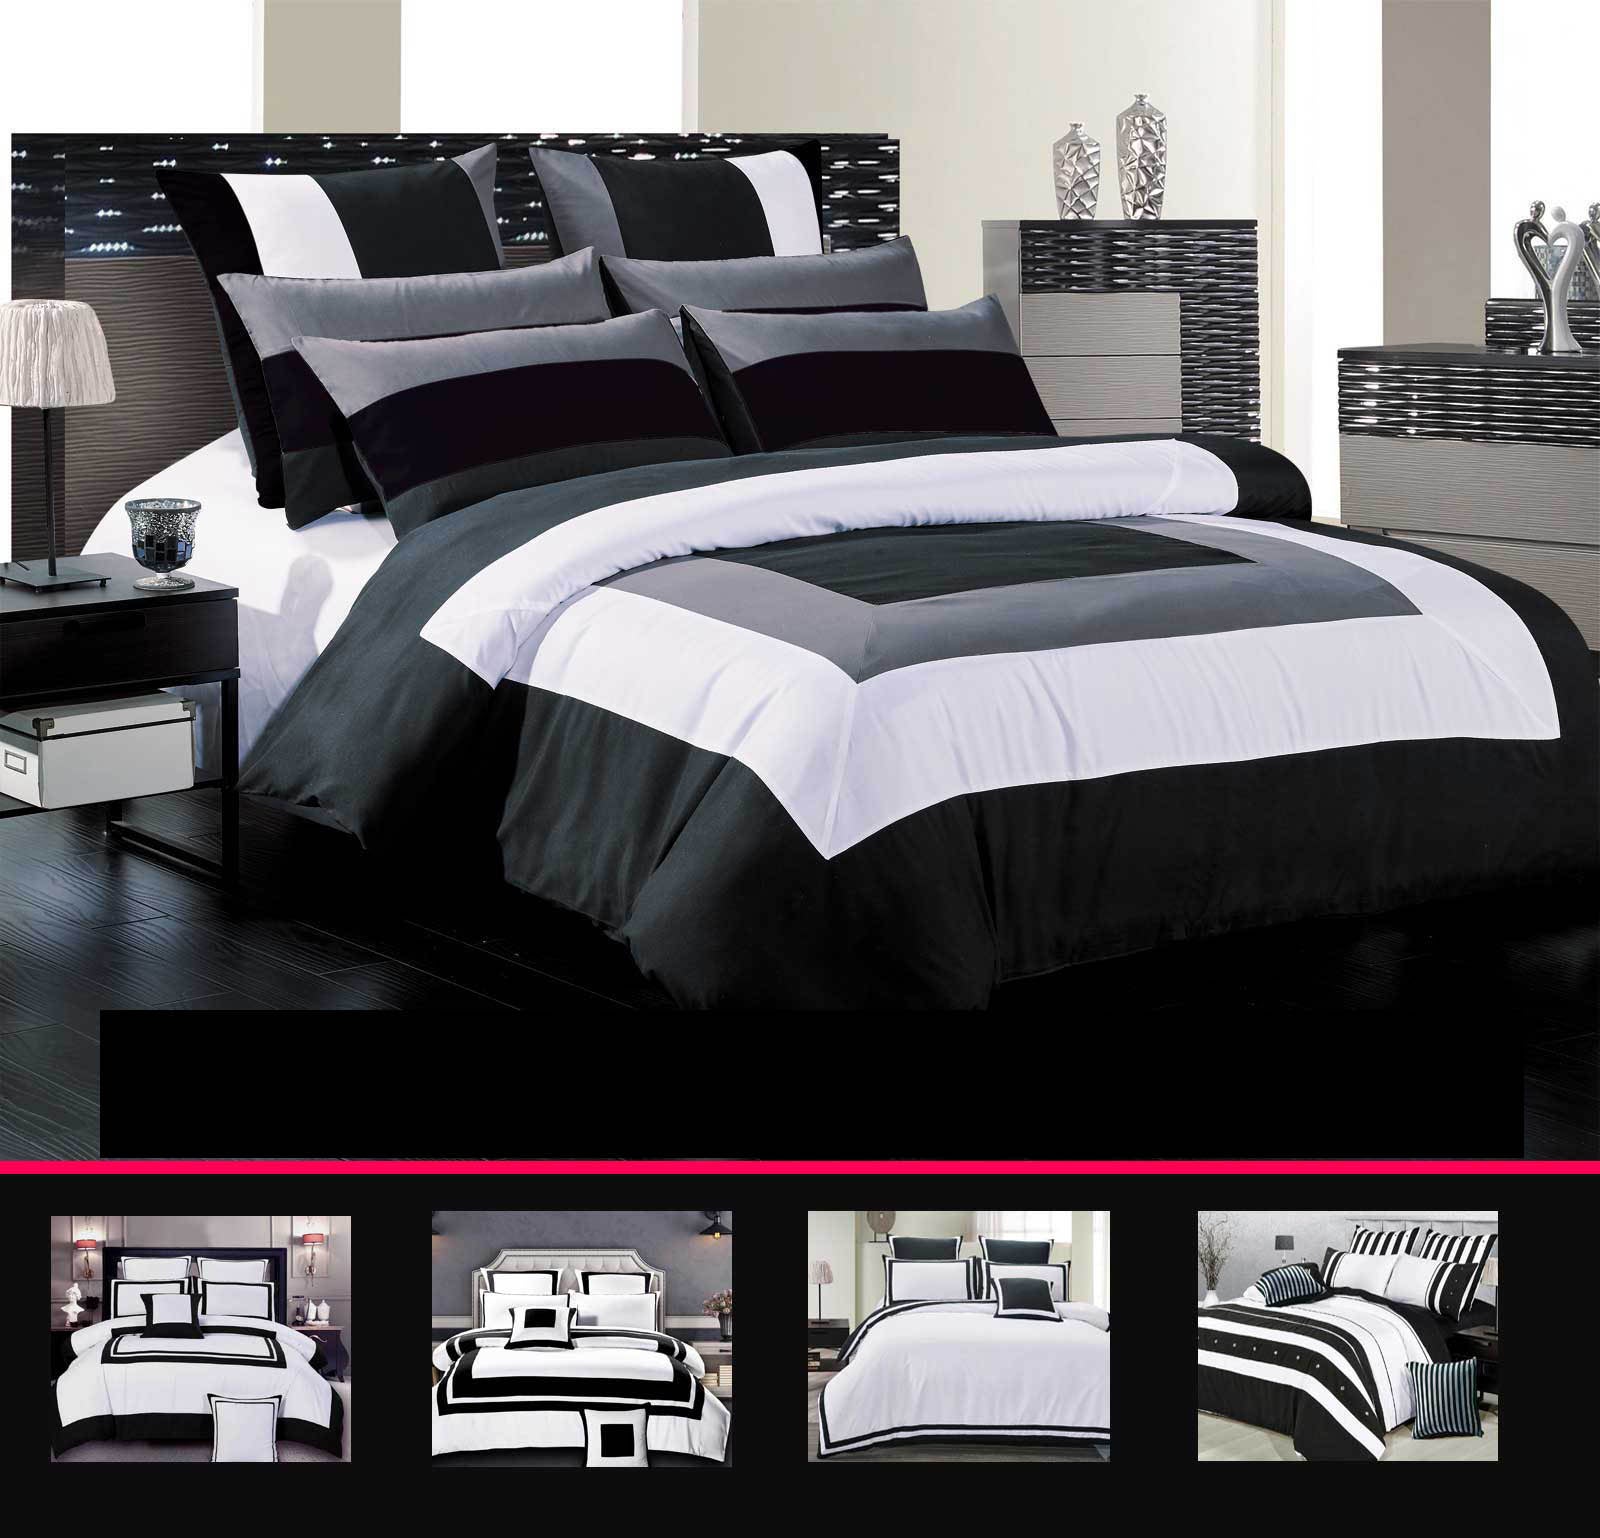 Hotel-Style Black White Quilt Cover Set /options( Queen / King / Super King / Double /Optionals)